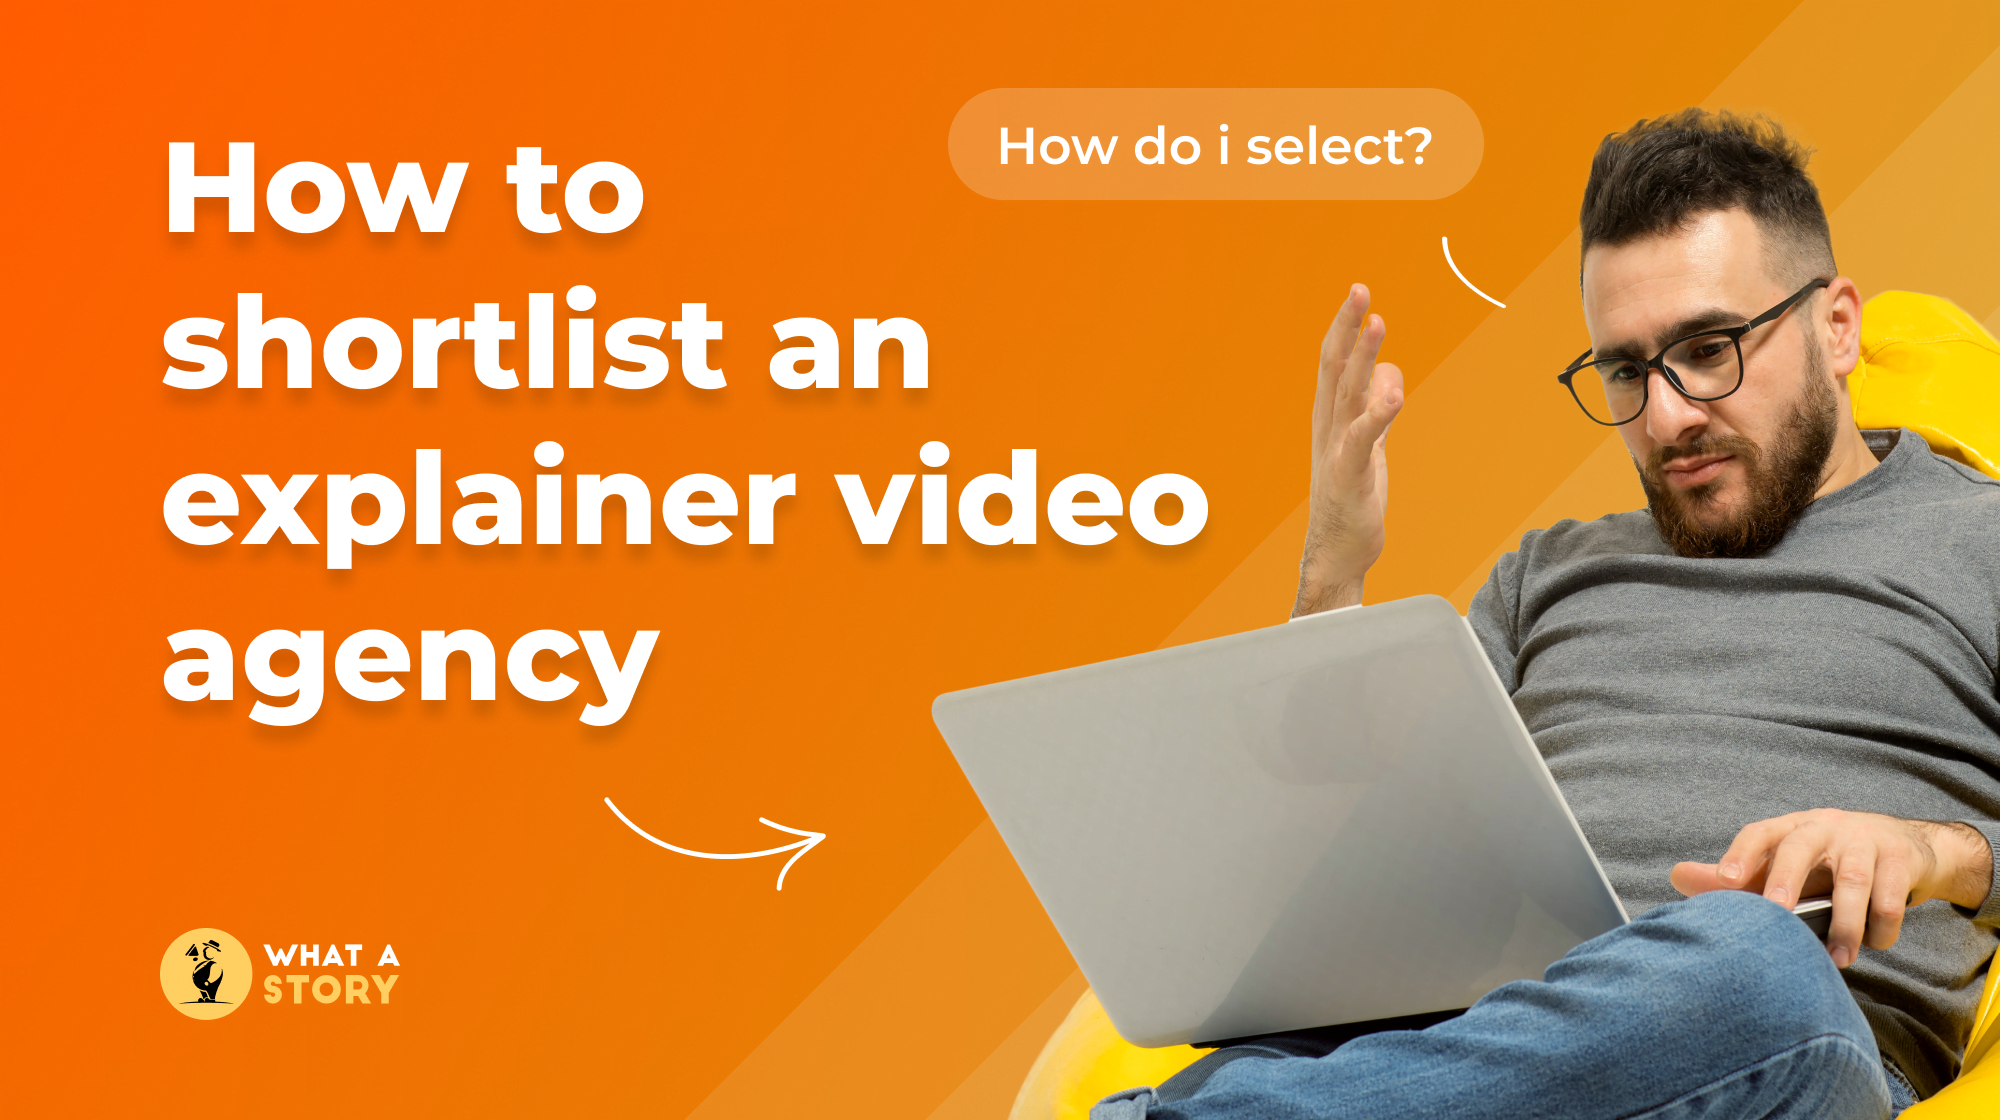 How to Shortlist a Video Agency for Explainer Videos